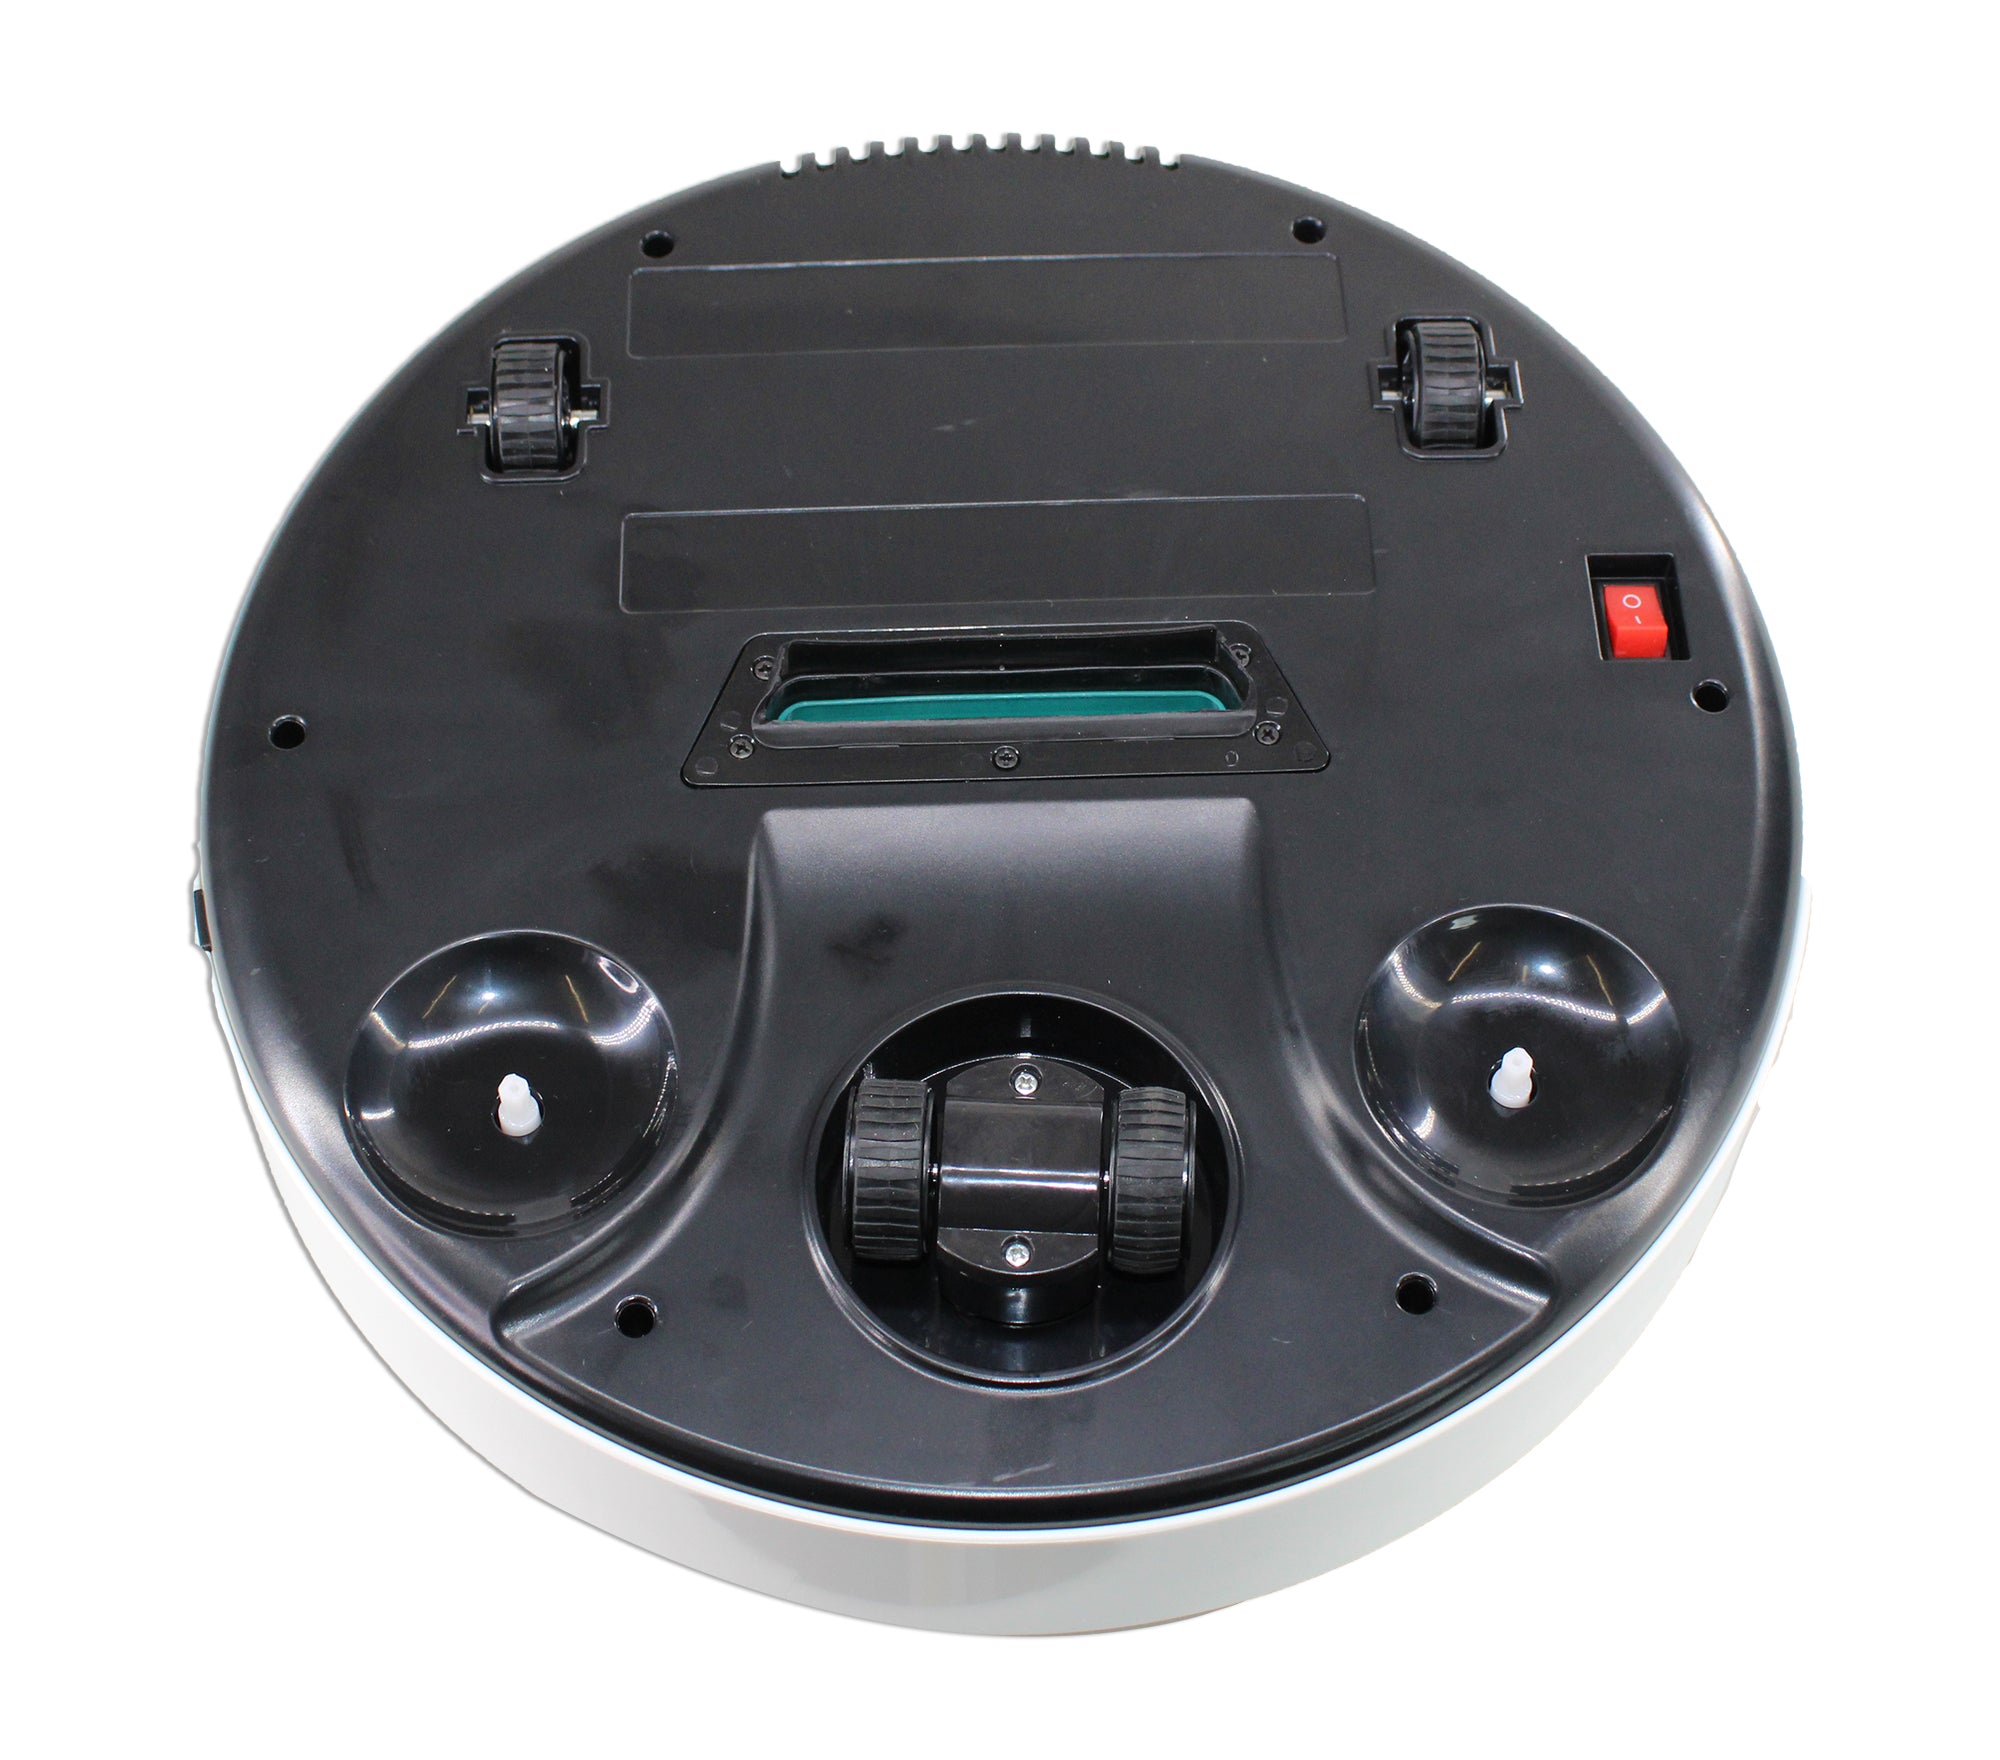 i66 Chargeable Sweeping Robot Floor Cleaner, Mop, Sweeper & Vacuum Cleaner